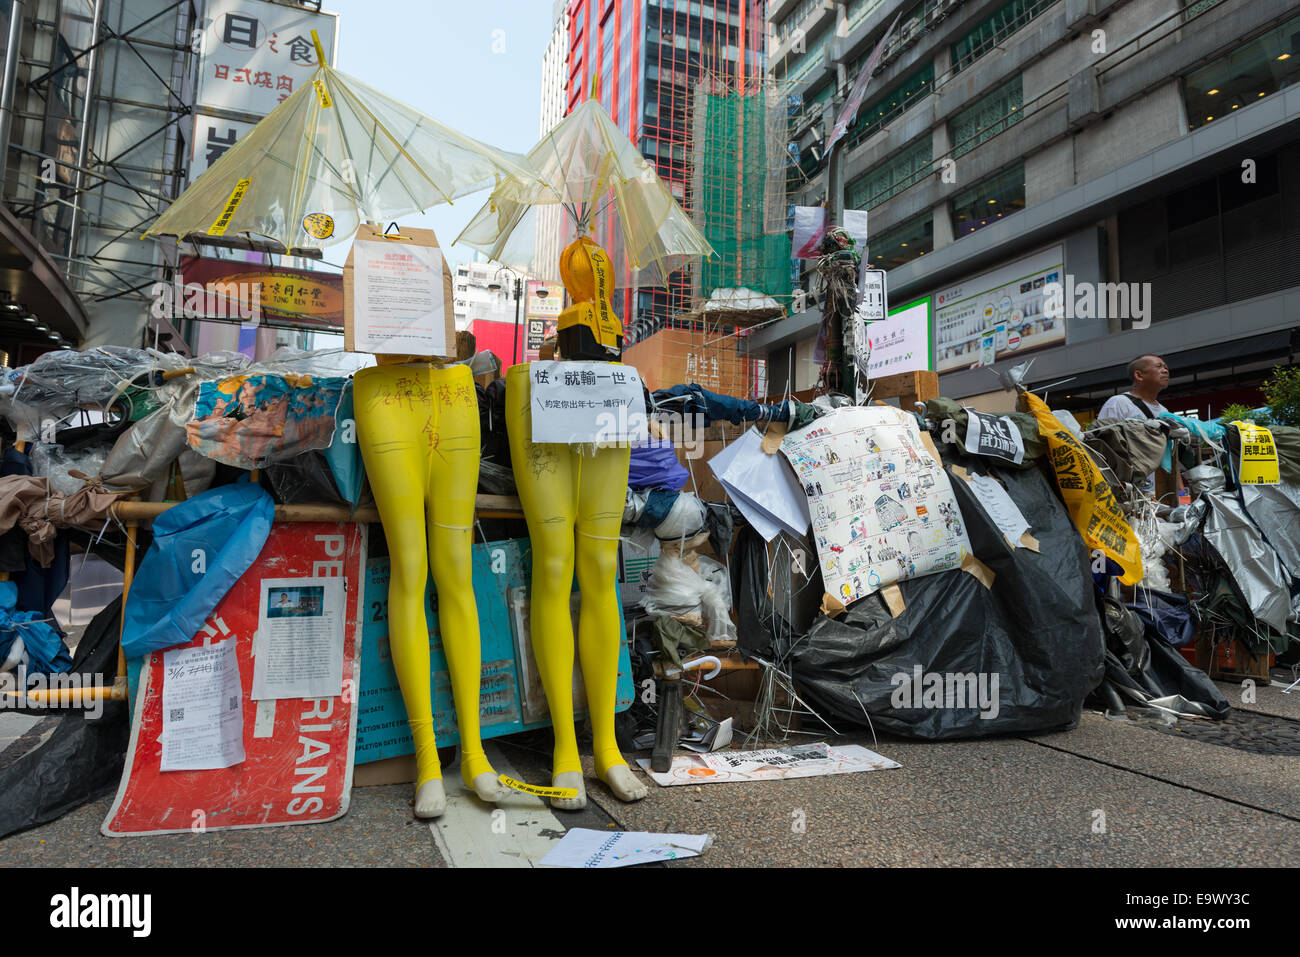 Hong Kong, China. 2nd November, 2014. Students, pro democracy activists and other supporters of Occupy Central, now called the umbrella movement or the umbrella revolution,remain in Mong Kok. Barricades on Nathan Road in Mong Kok. Stock Photo